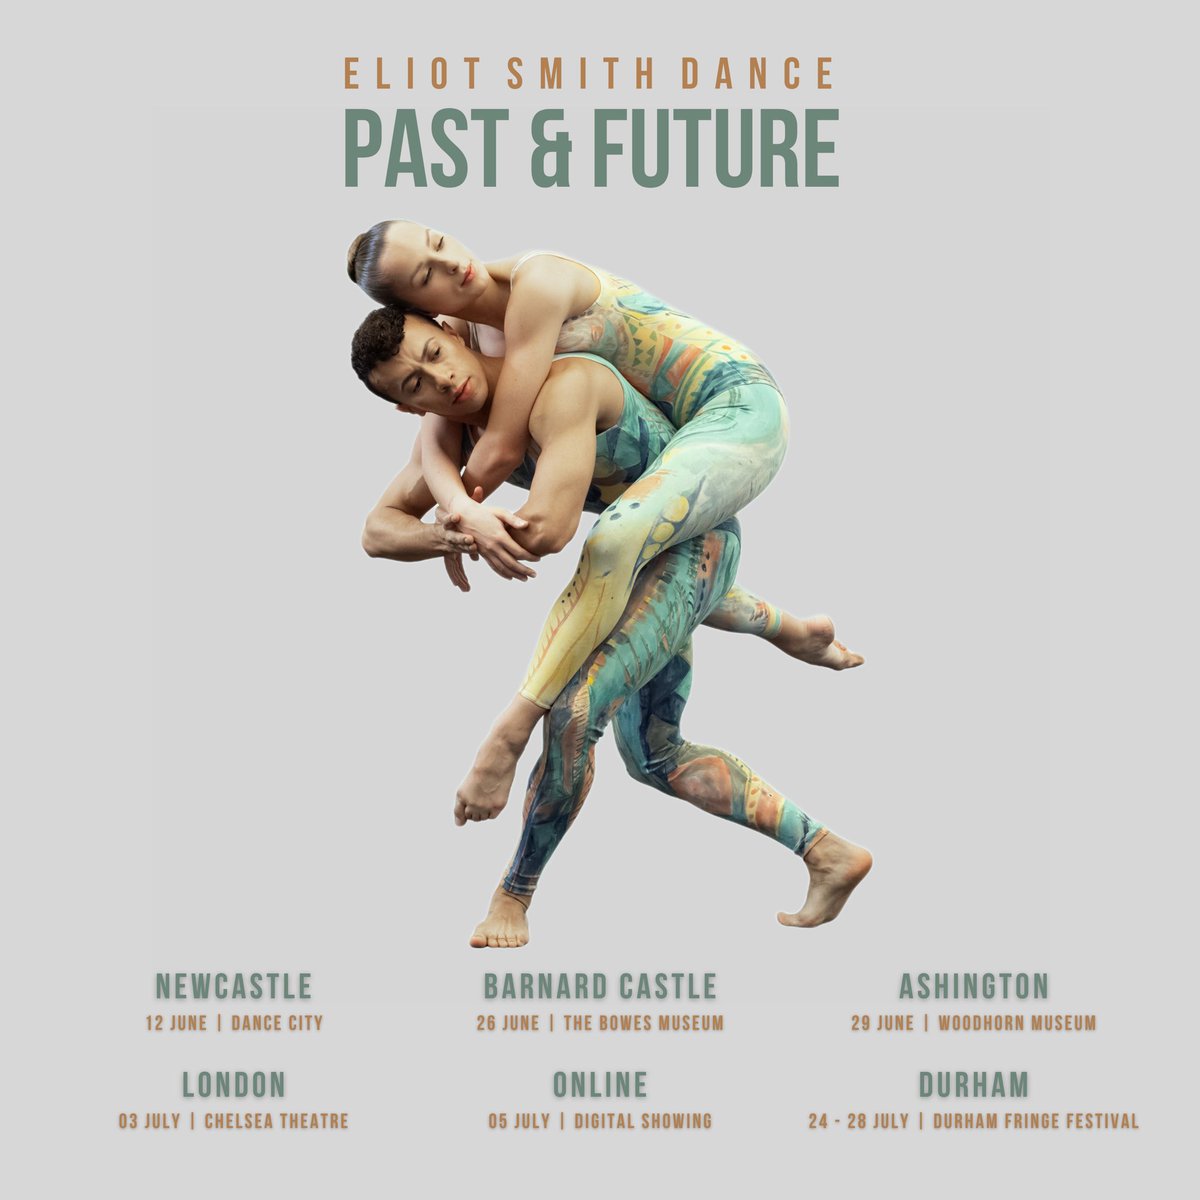 We’re OVERJOYED to announce more performances for our upcoming season, “PAST & FUTURE” 🩵 @dancecity 12 June @TheBowesMuseum 26 June @Woodhorn 29 June @ChelseaTheatre 03 July Online 05 July @durhamfringe 24-28 July Tickets are now available at: eliotsmithdance.com/pastandfuture